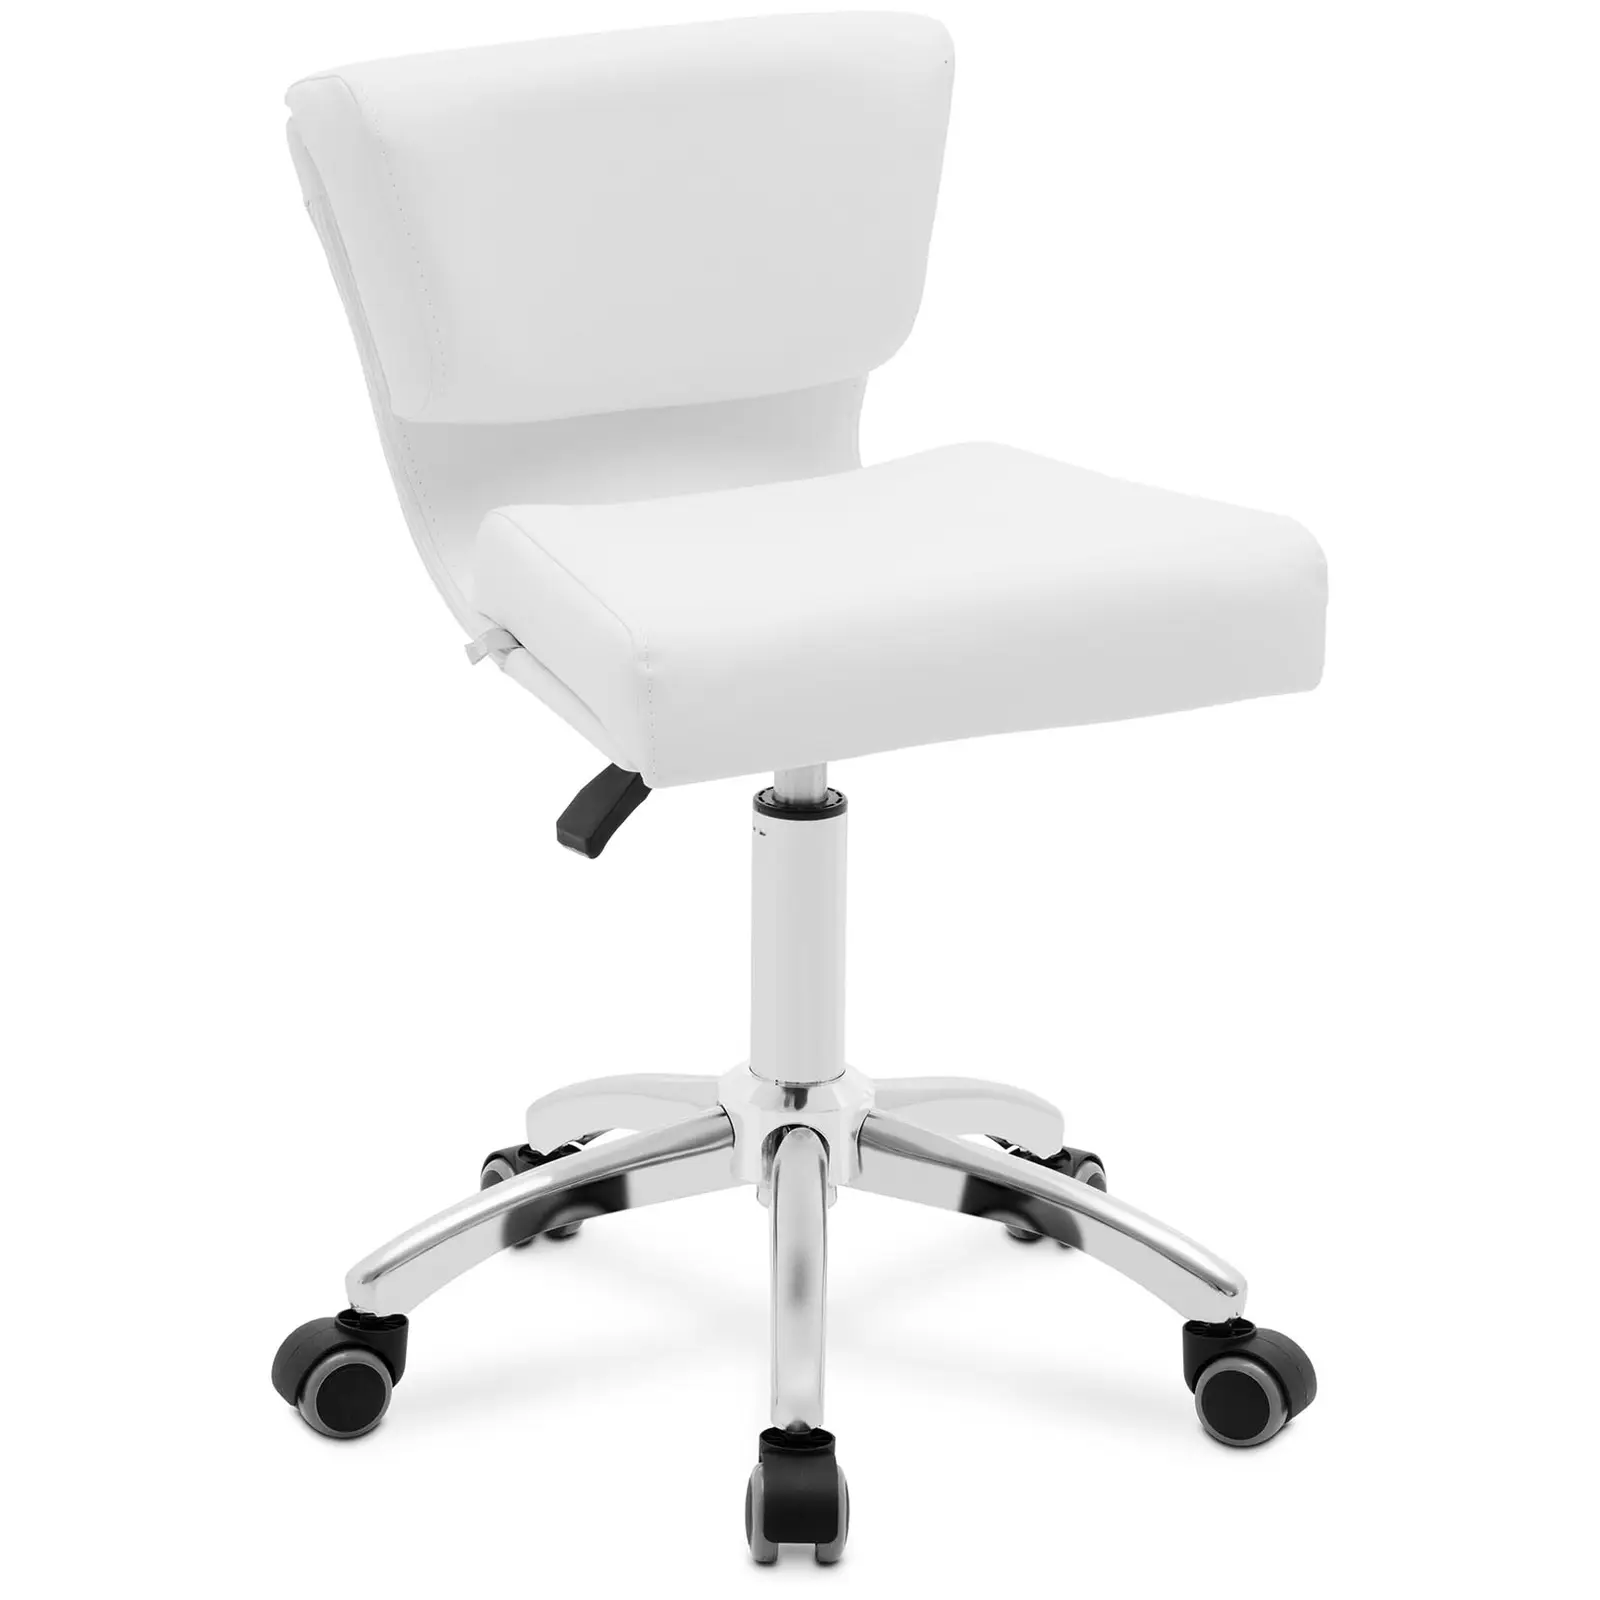 Stool Chair With Back - 47 - 61 cm - 150 kg - white